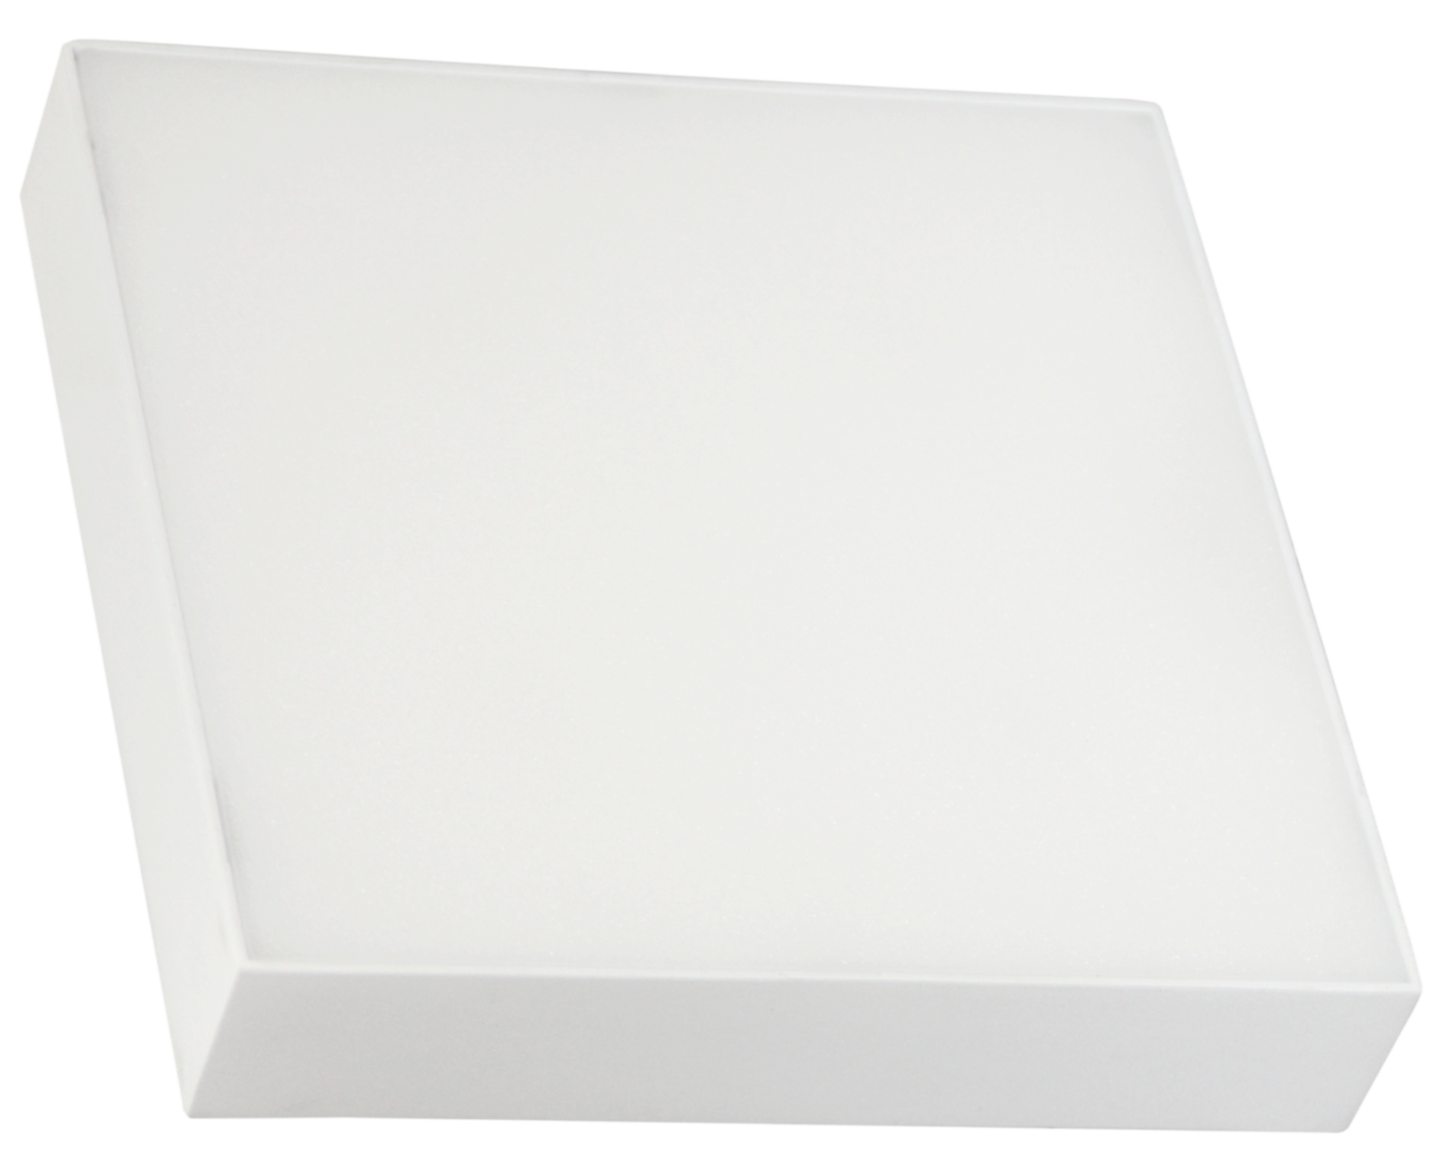 Square Surface Panel Backlit 15 Watt by Ledos (SP 755)